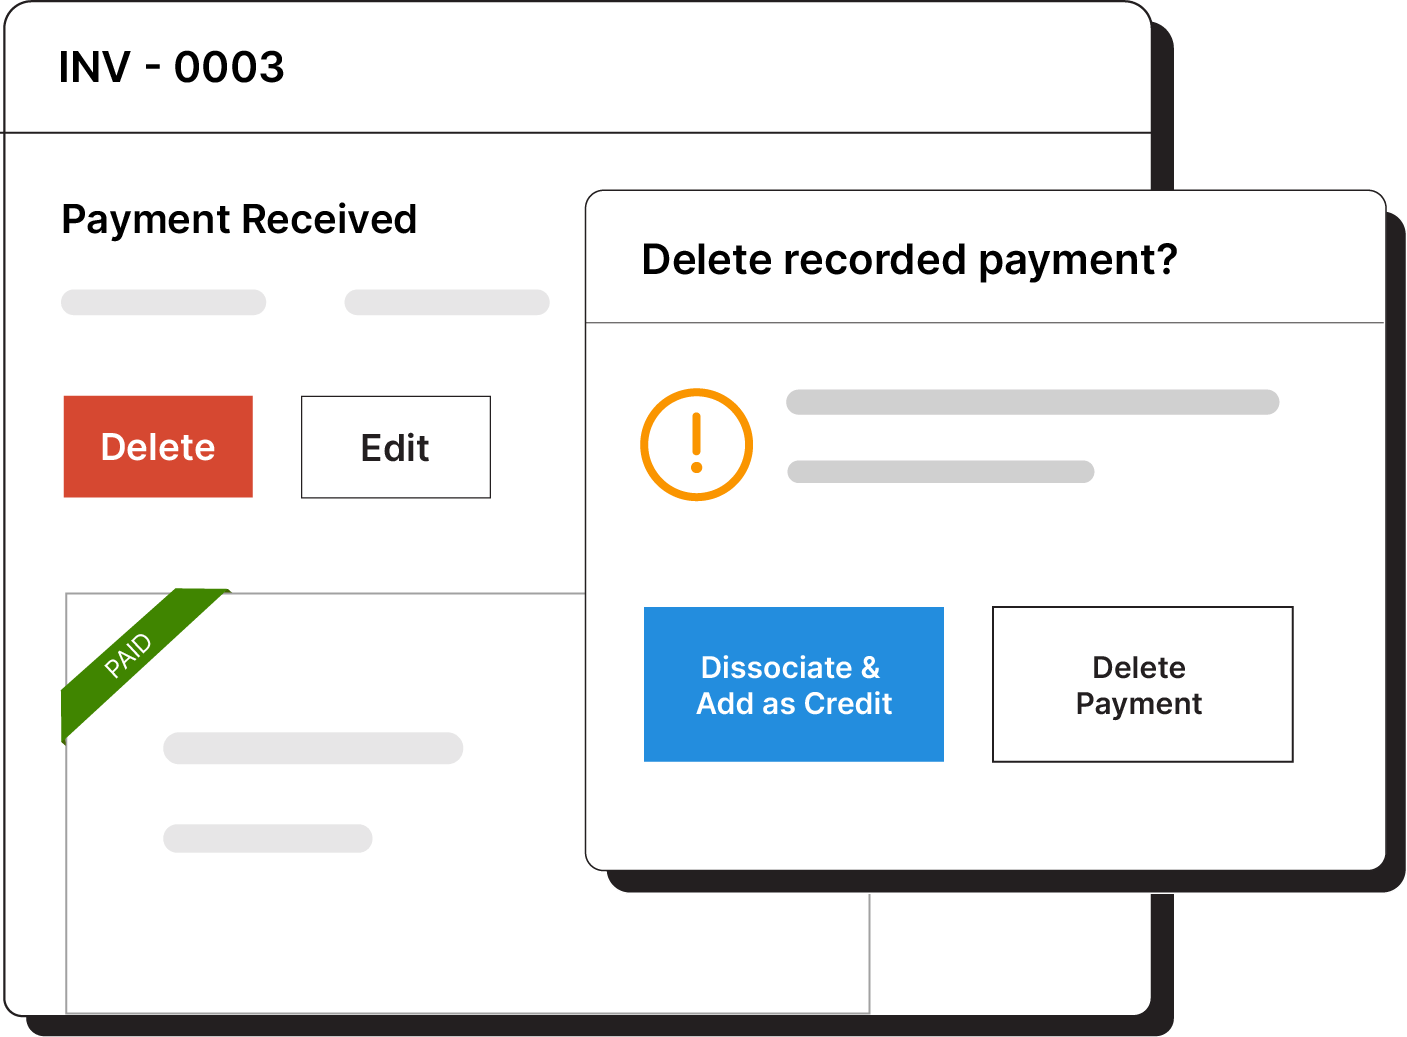  Dissociate a payment and convert it to an advance payment